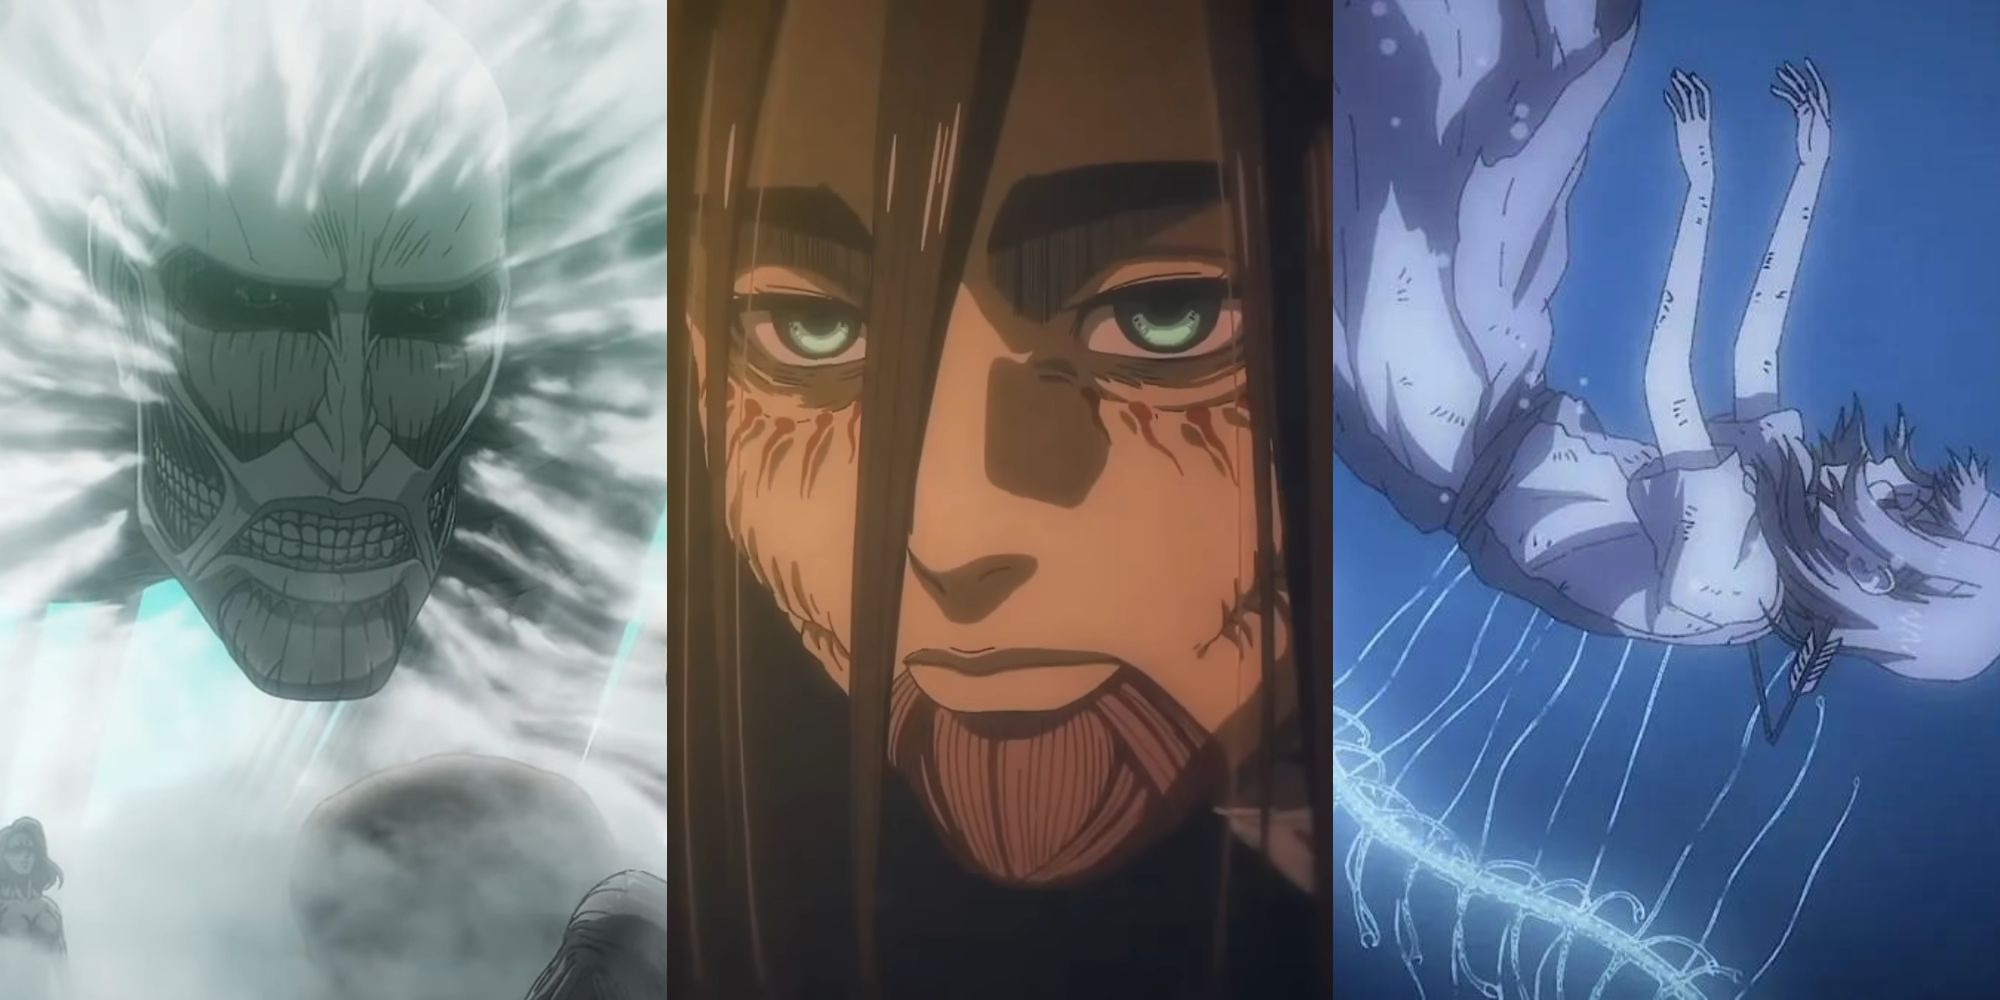 10 details of Shingeki no Kyojin's final chapter that you may have